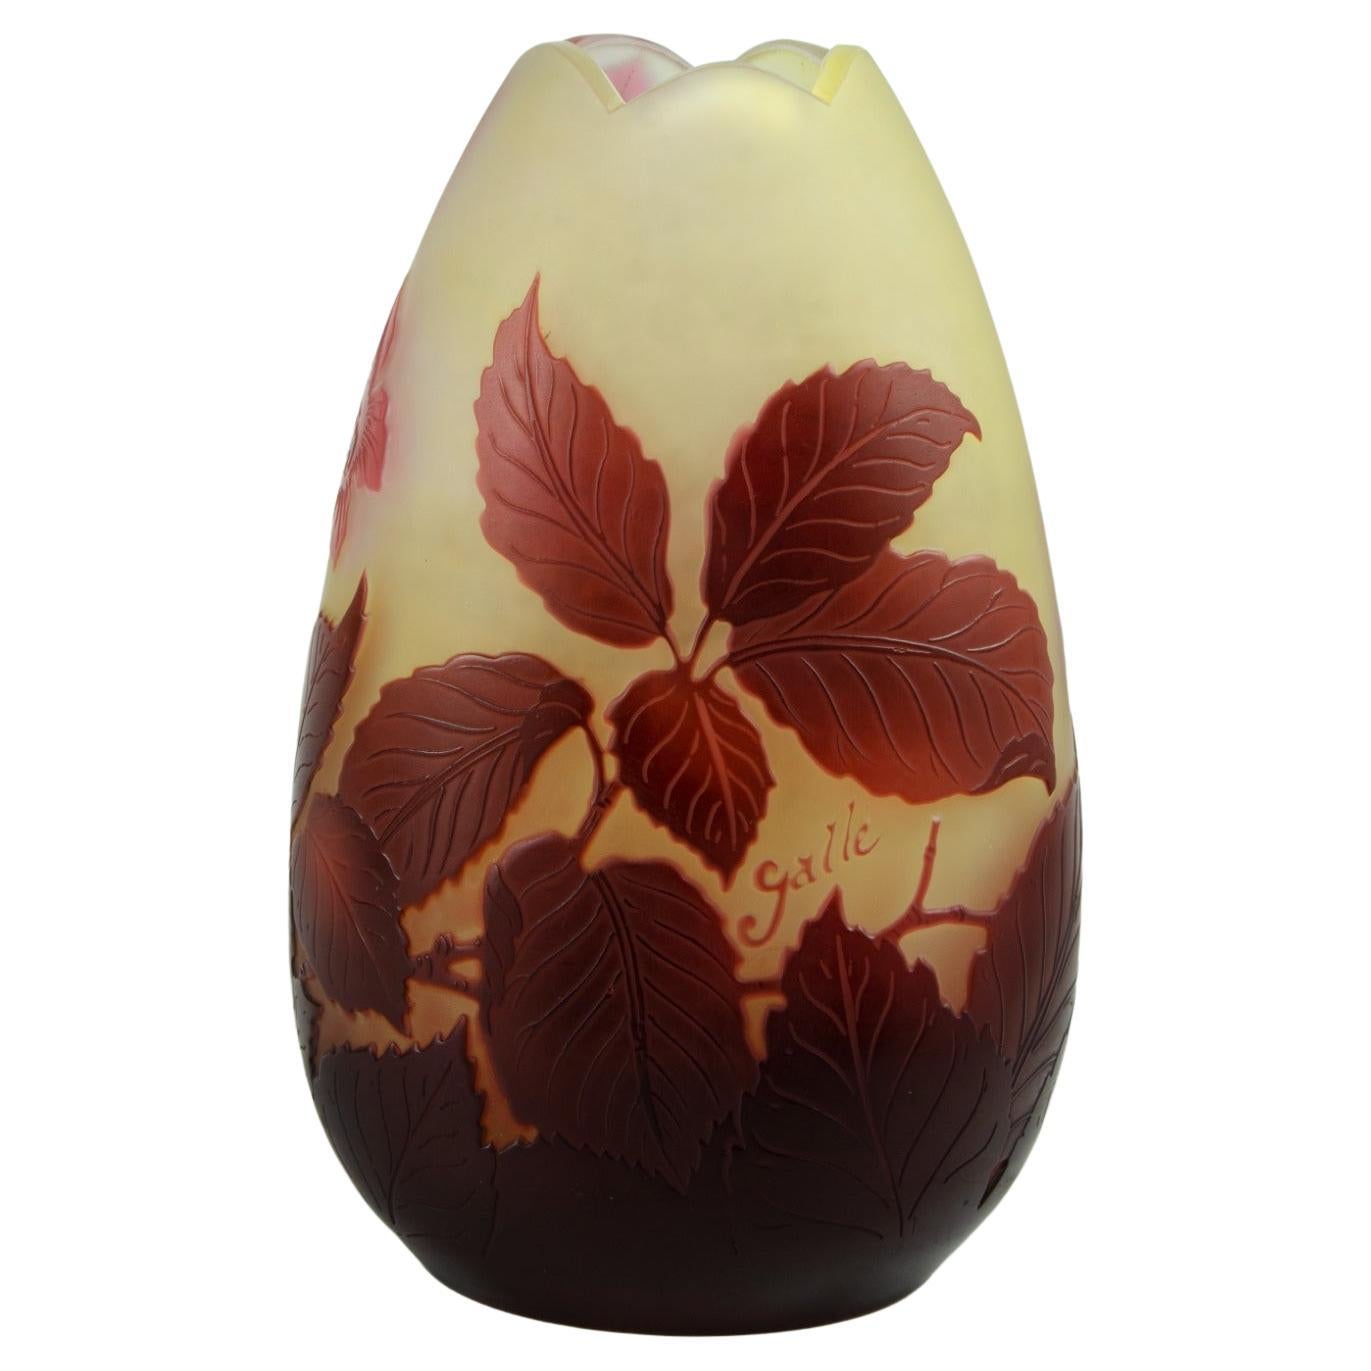 Emile Galle Cameo Glass Vase 1900 For Sale